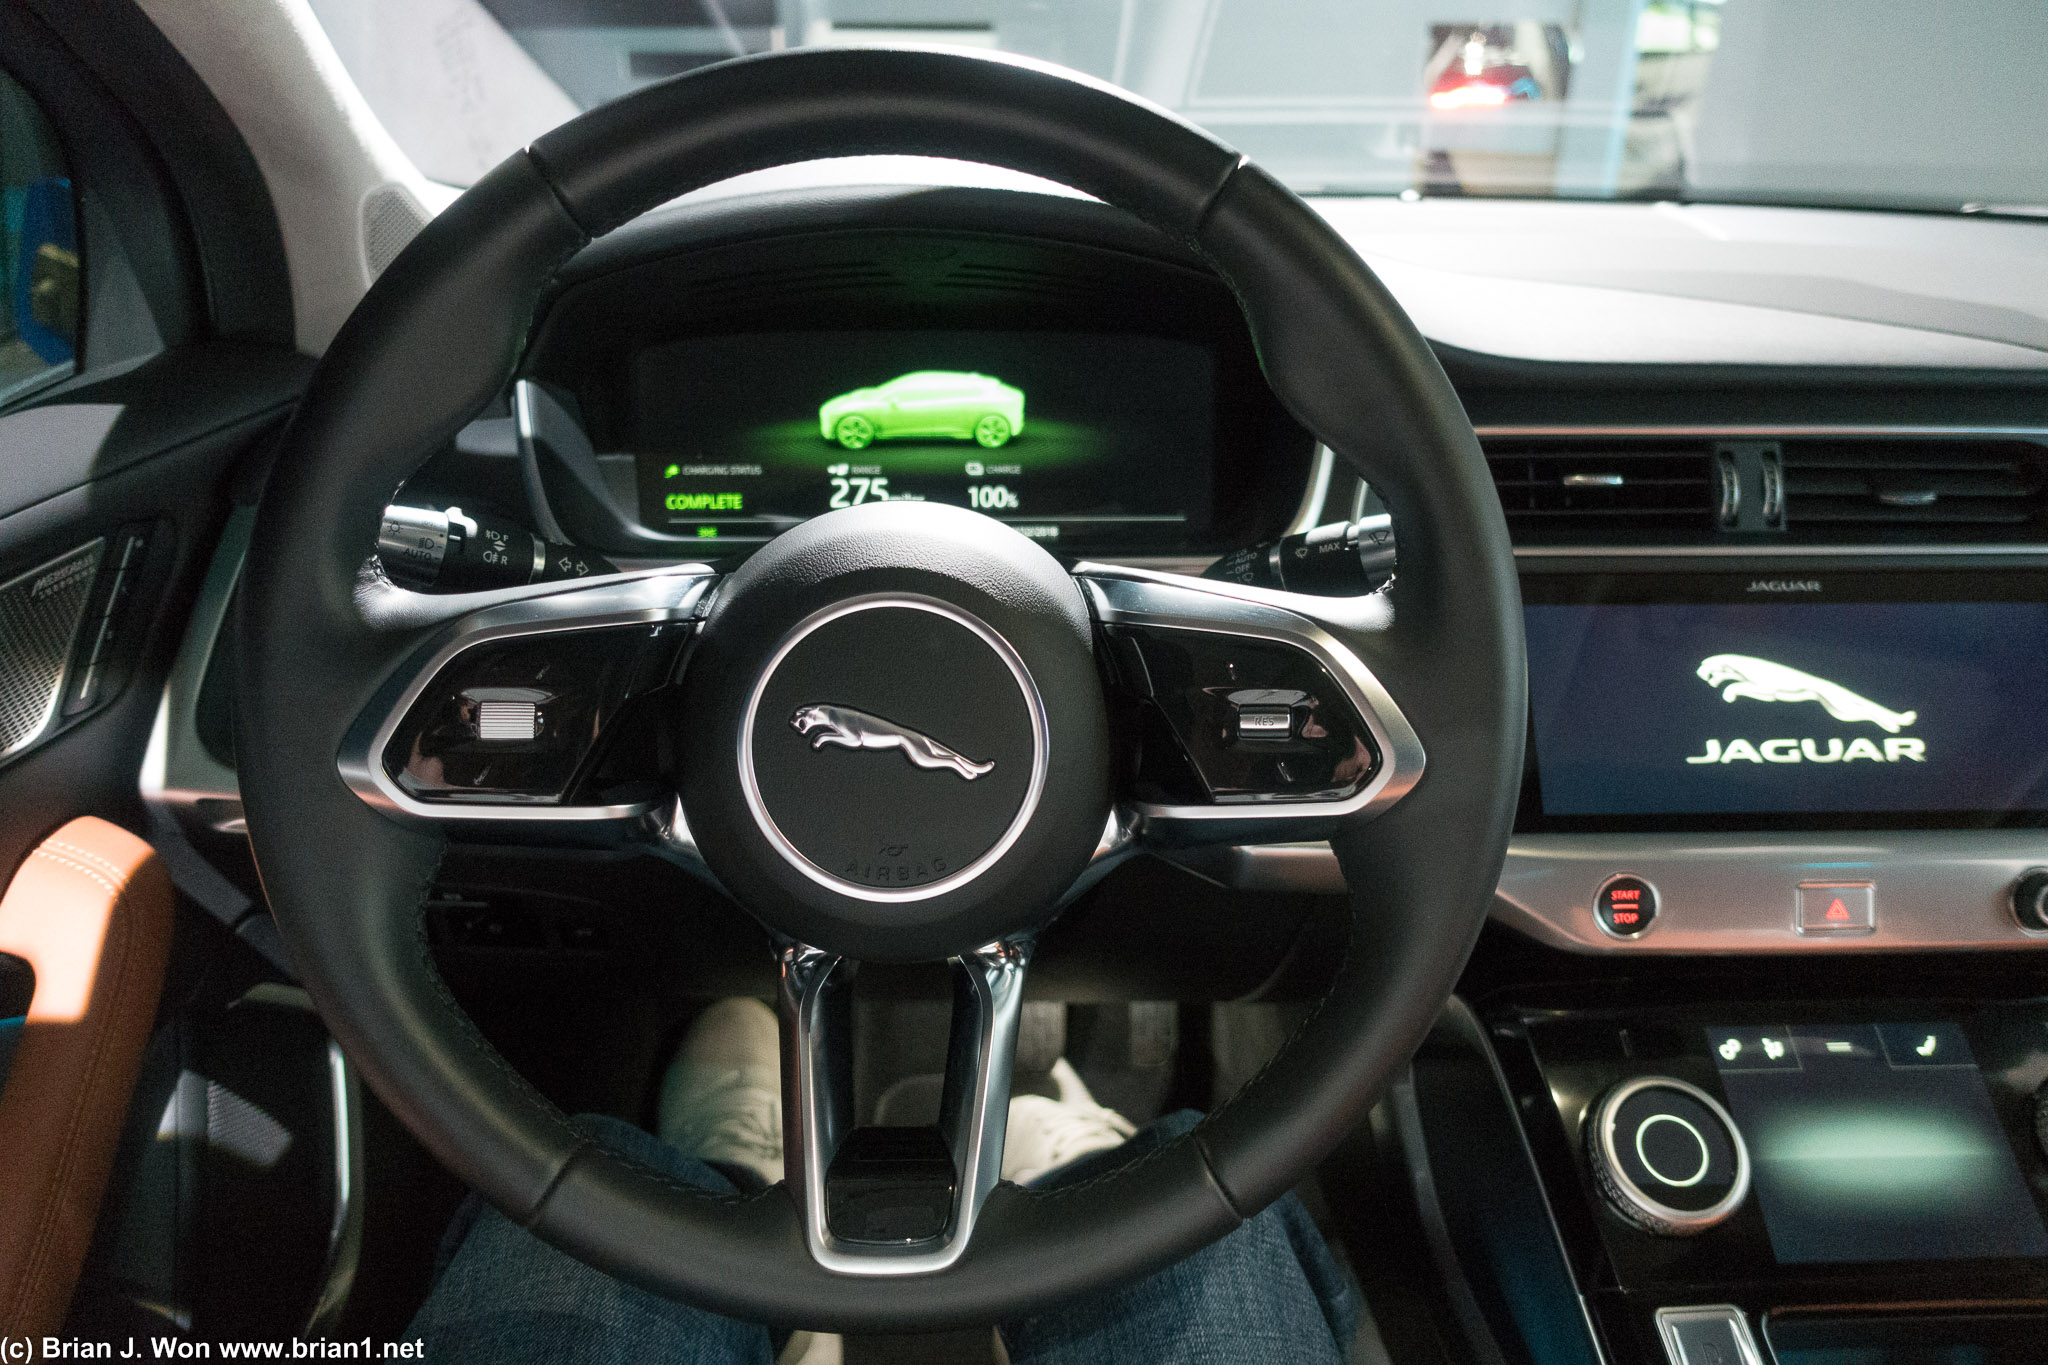 It's like Jaguar can do a $100k interior or a $20k one, and nothing in-between.